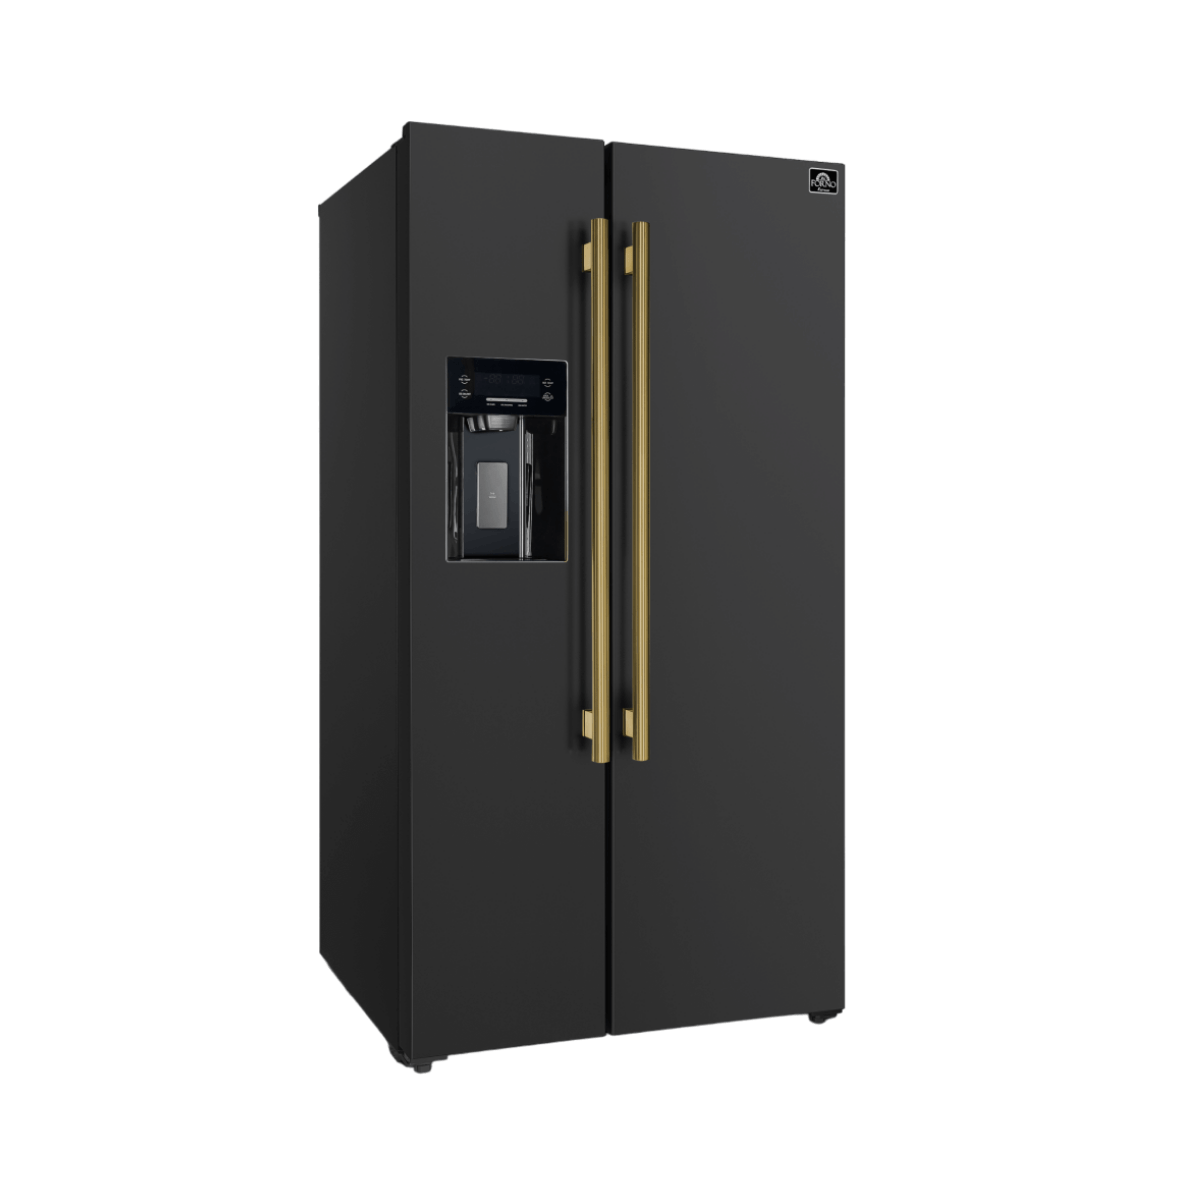 Forno Espresso 36" 20 Cu. Ft. Side-By-Side Refrigerator with Water and Ice Dispenser in Black with Antique Brass Handles Refrigerator FFRBI1844-36BLK Luxury Appliances Direct